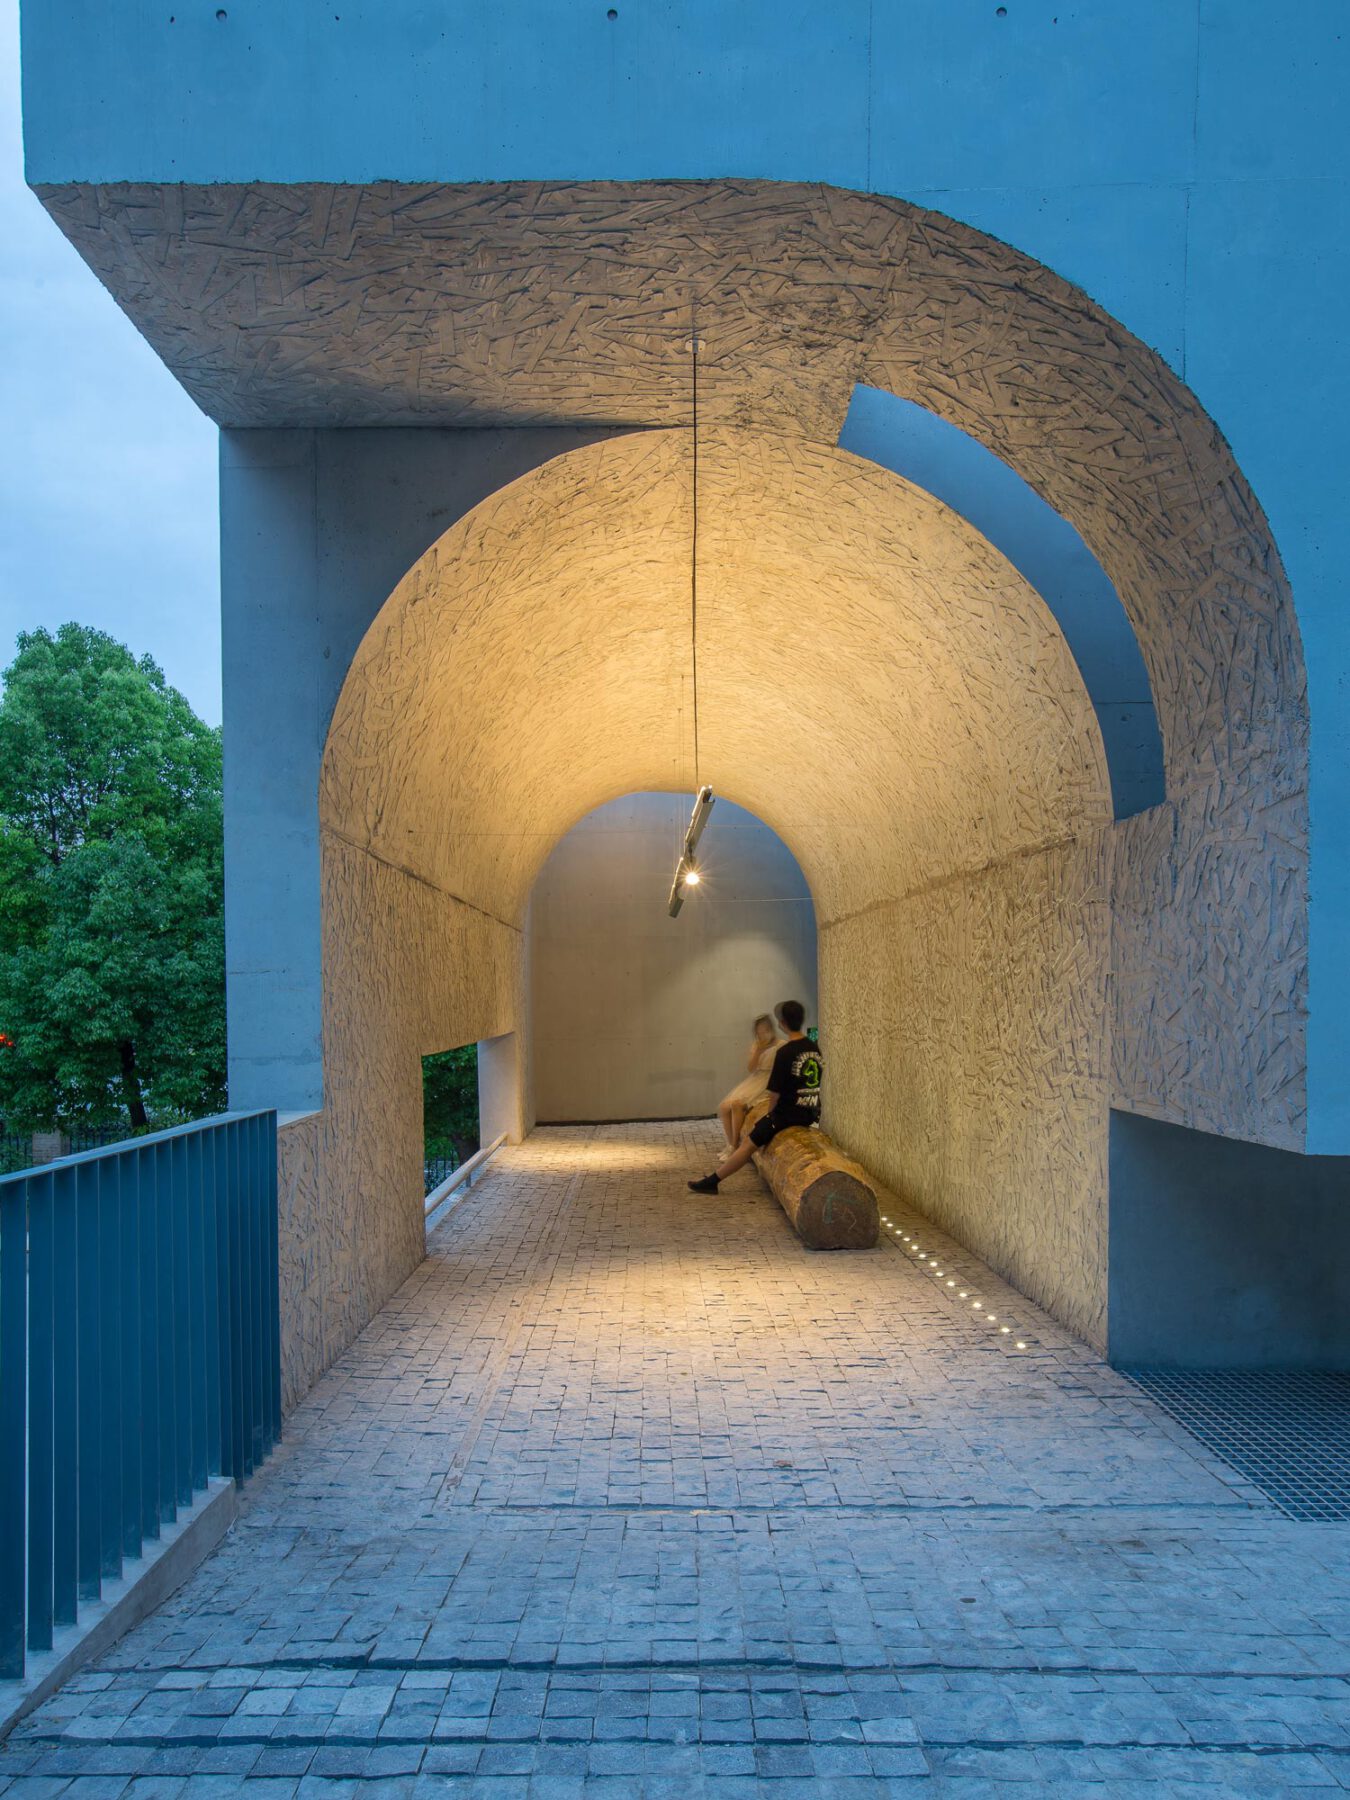 Archisearch Art Gallery Extension of Nanjing University of the Arts in China | by Atelier Diameter